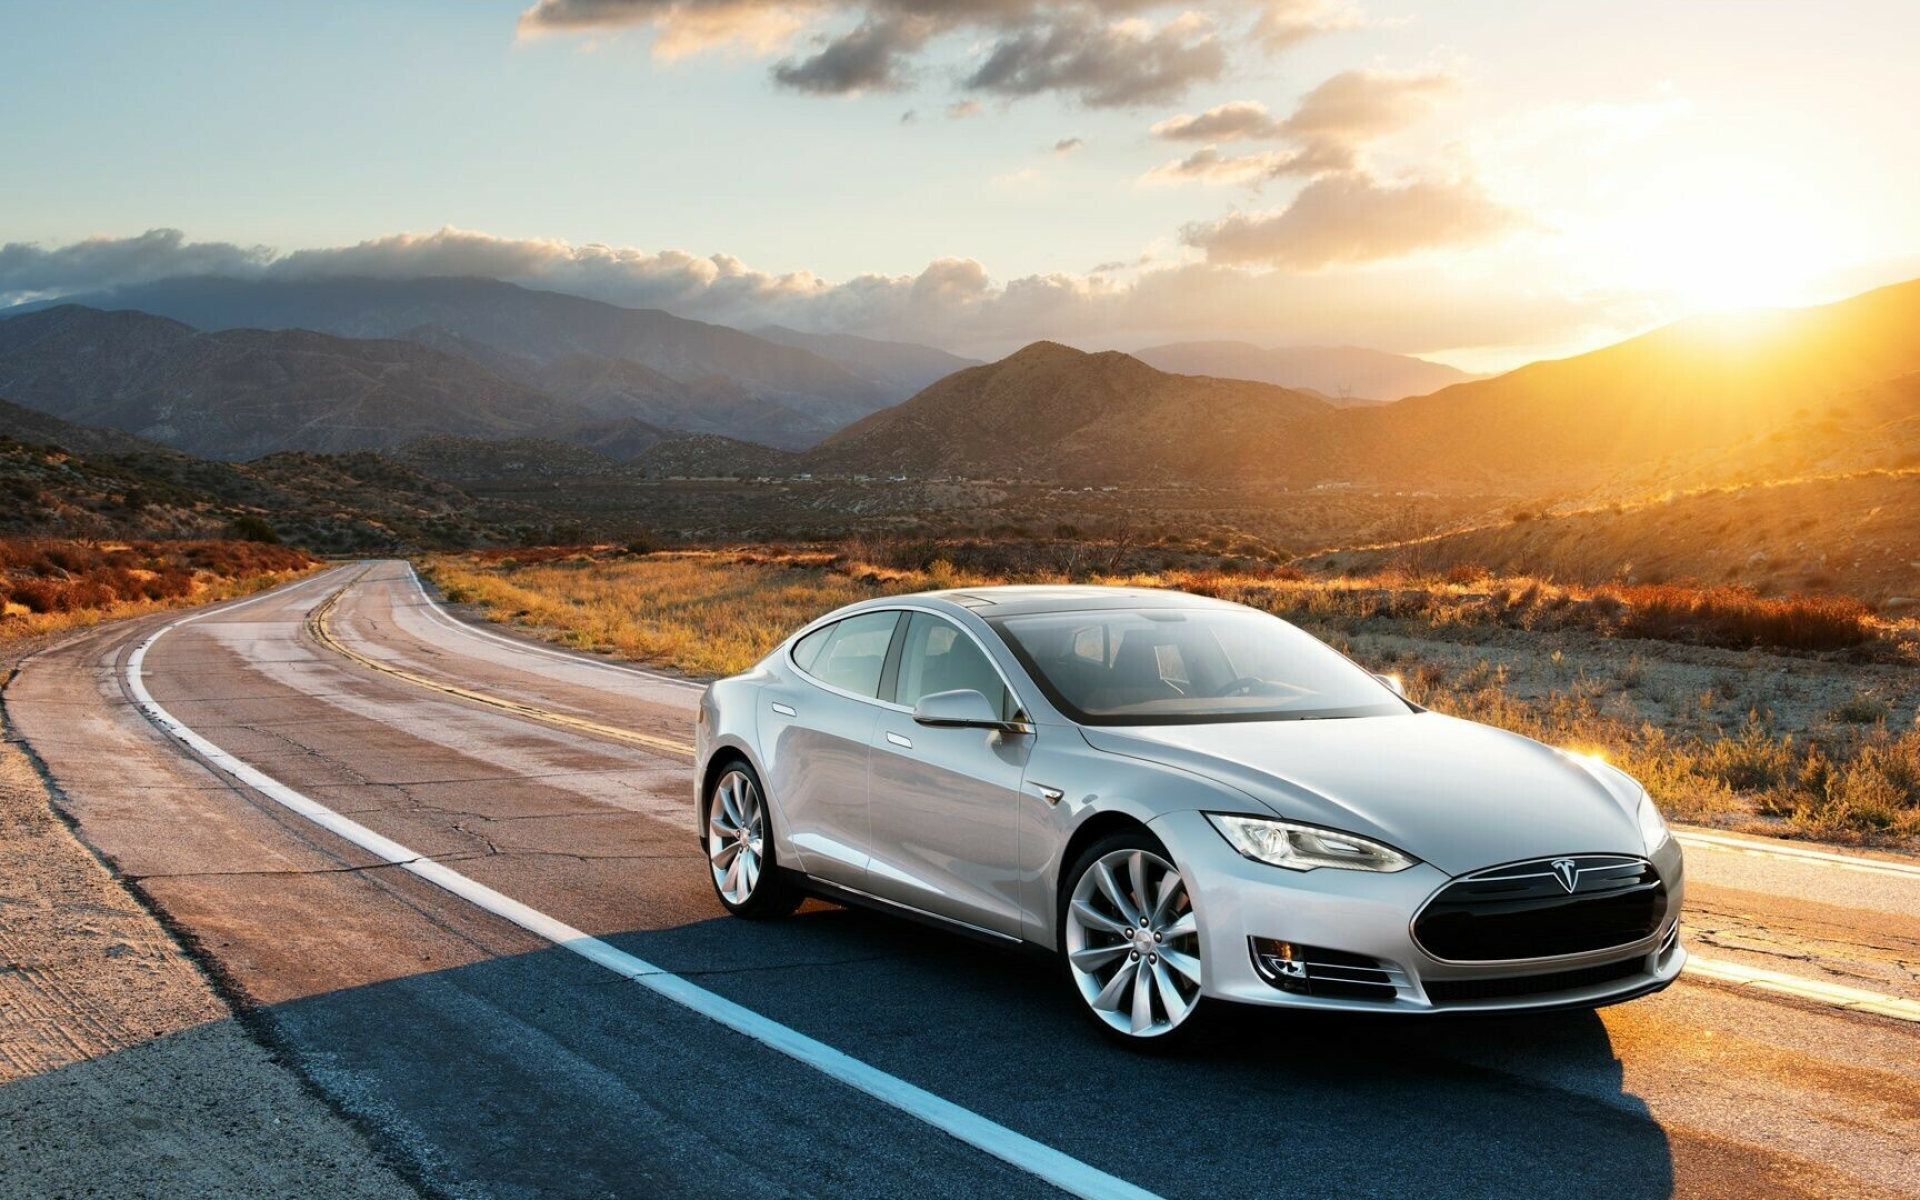 Tesla Model S: A fully electric large sedan available in two configurations, Automotive and clean energy company. 1920x1200 HD Wallpaper.